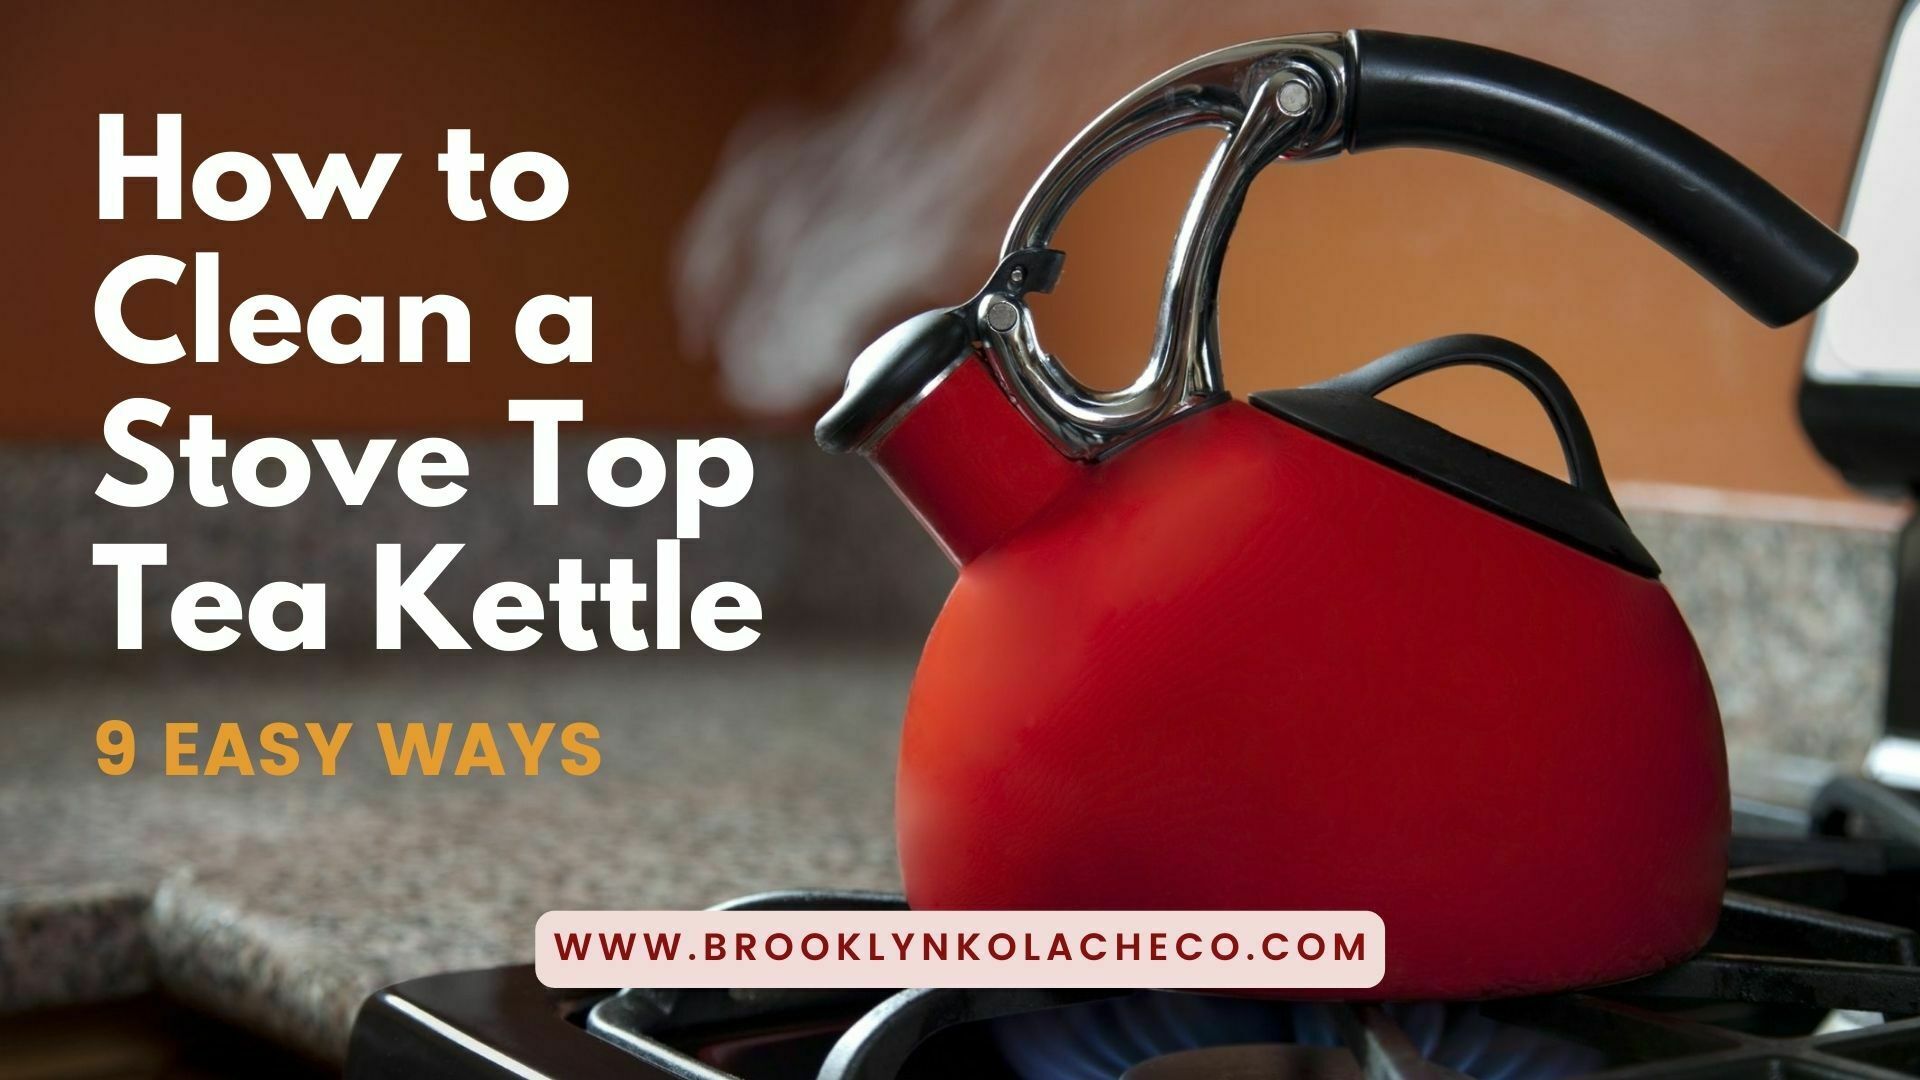 How to Clean a Stove Top Tea Kettle